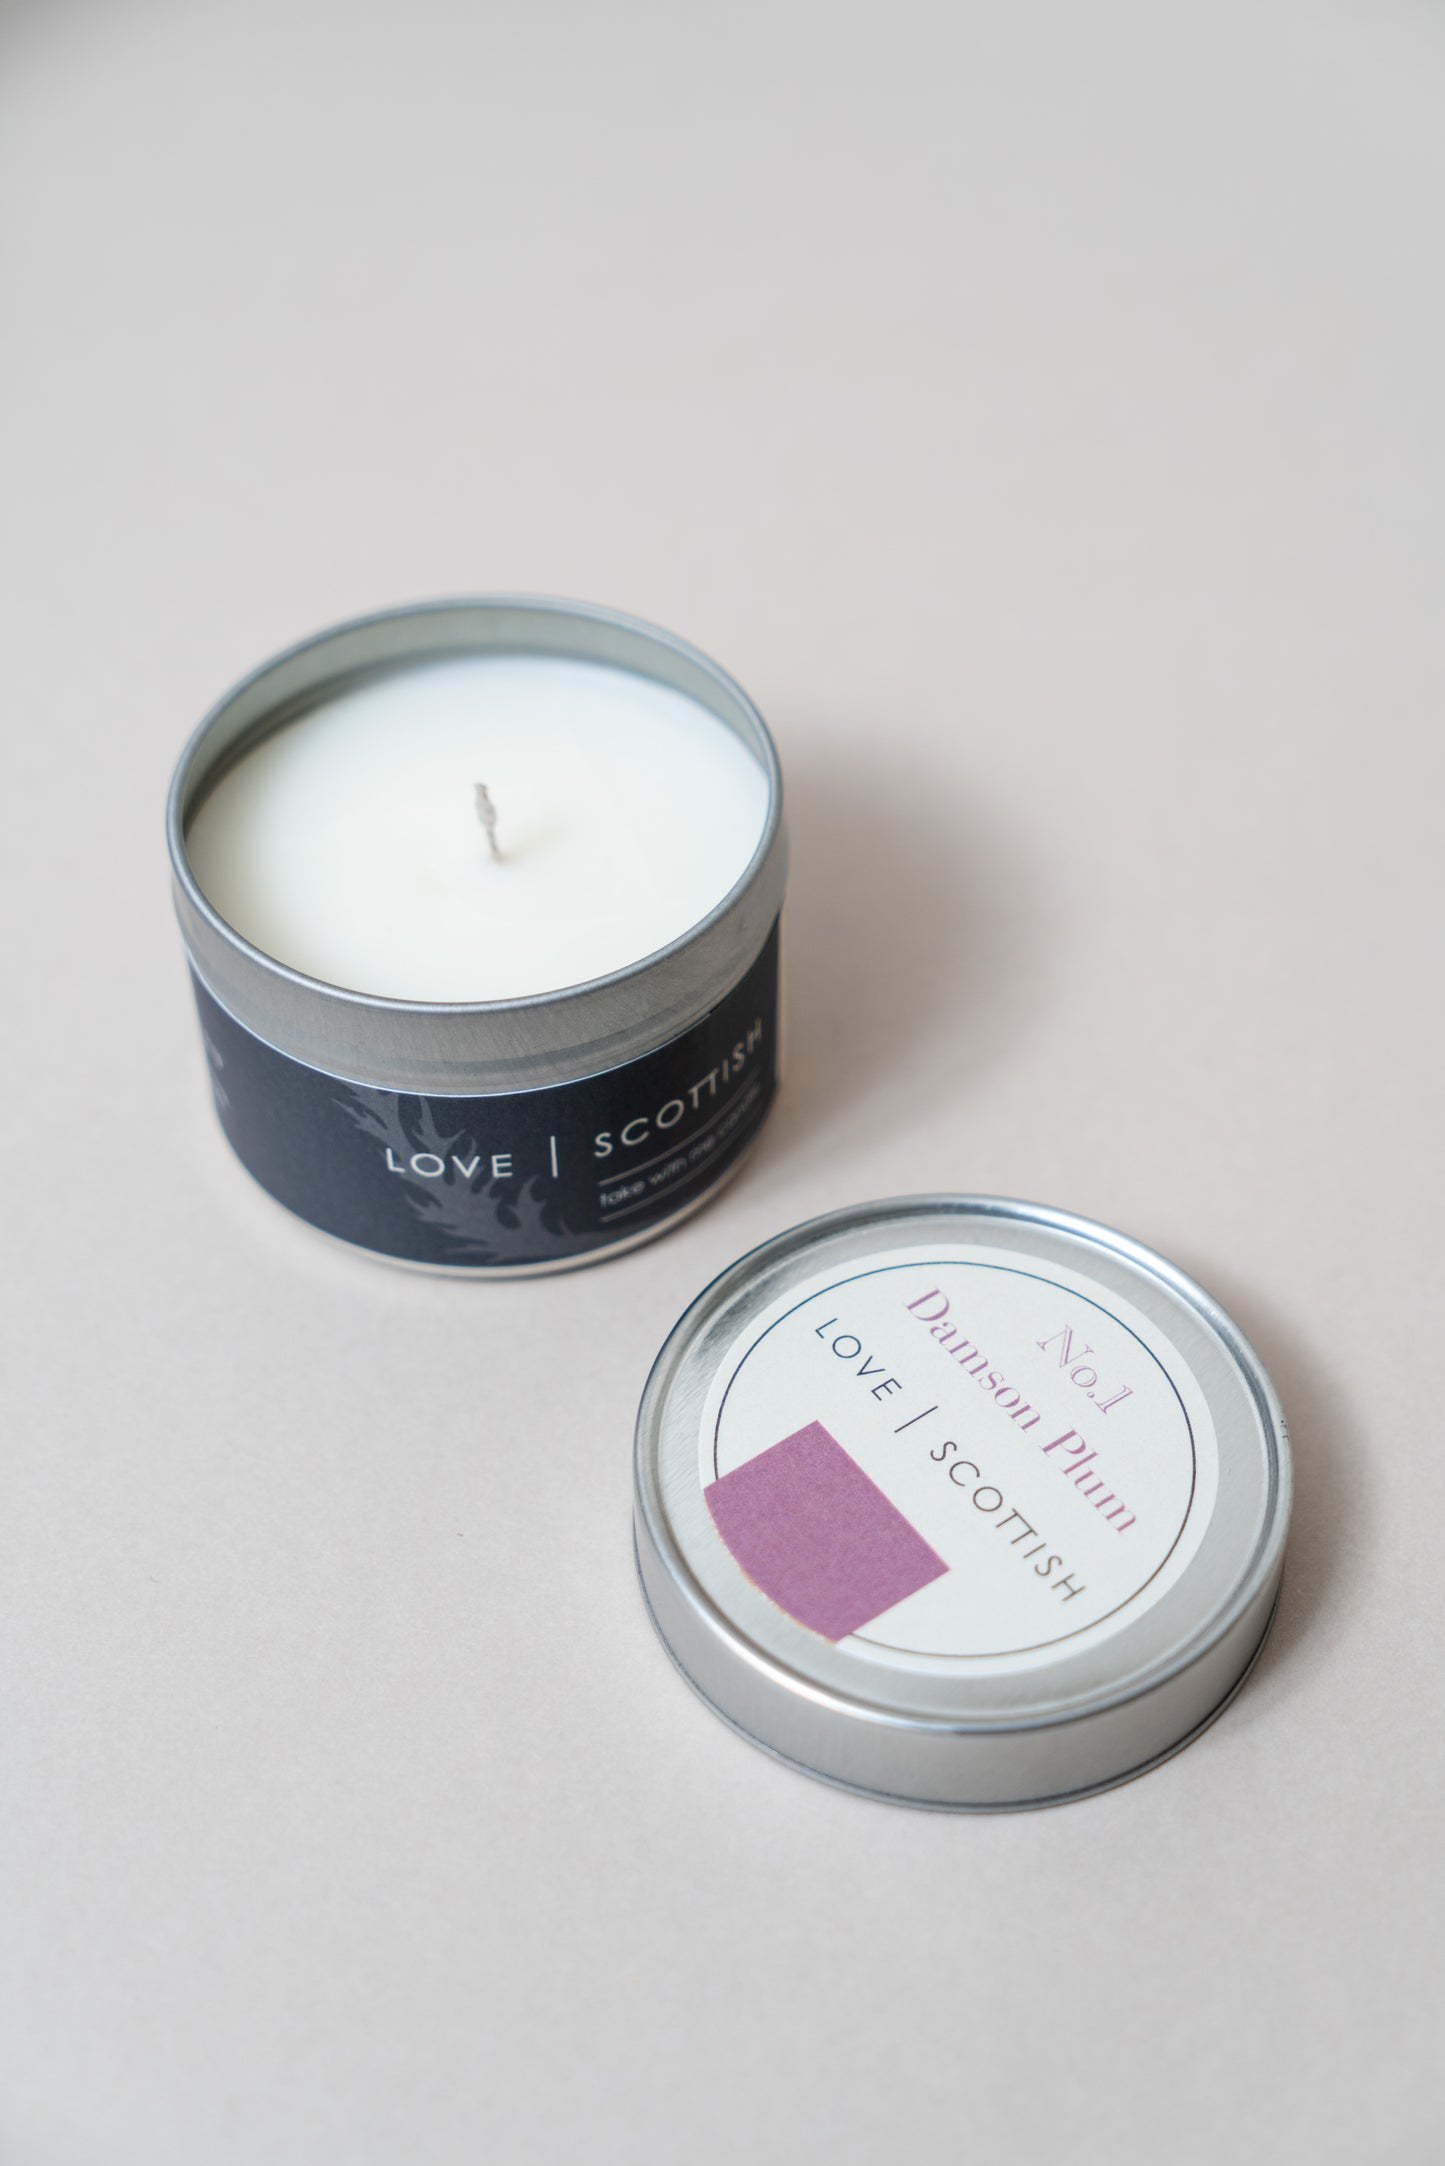 Damson Plum Travel Tin Candle on a White Background